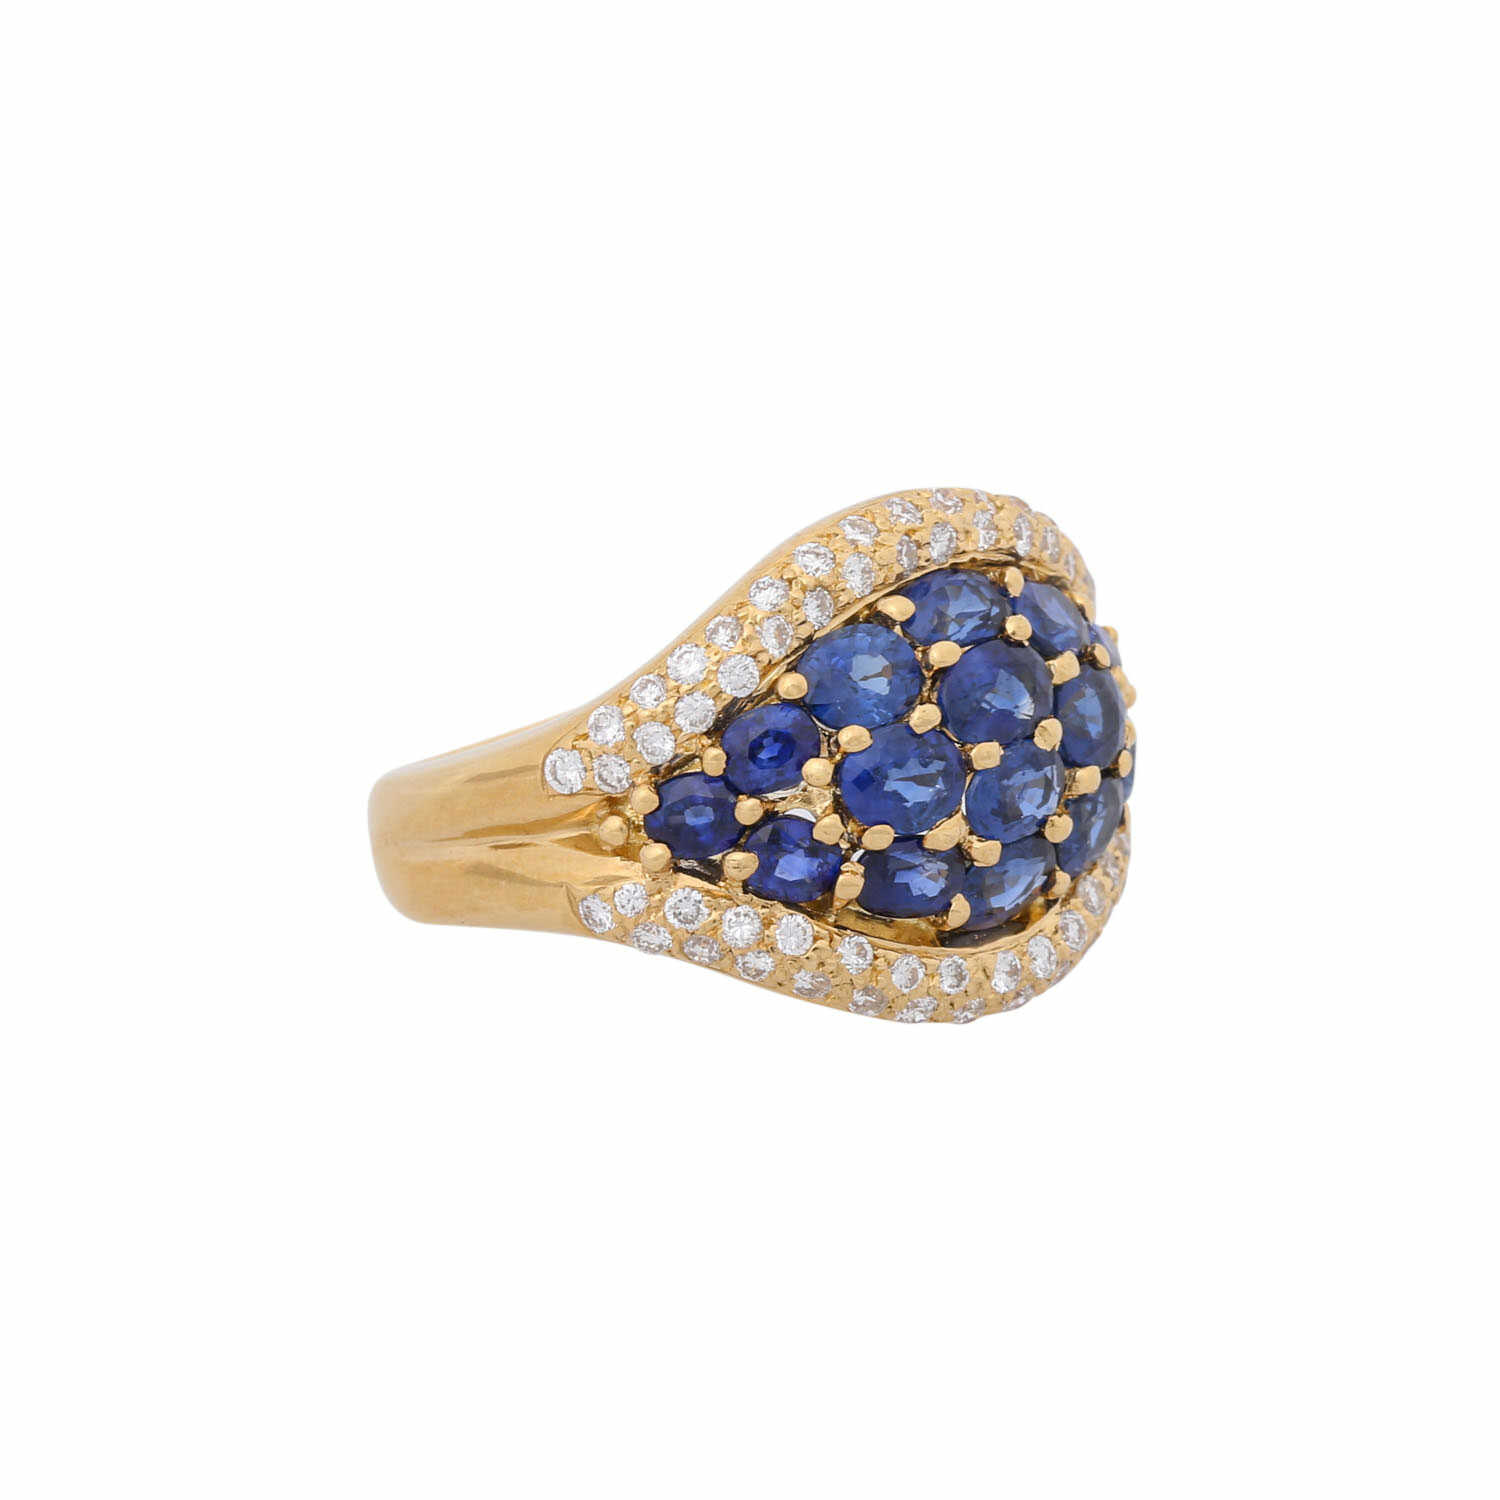 Ring with sapphires comp. ca. 2,6 ct and diamonds comp. ca. 0,4 ct,